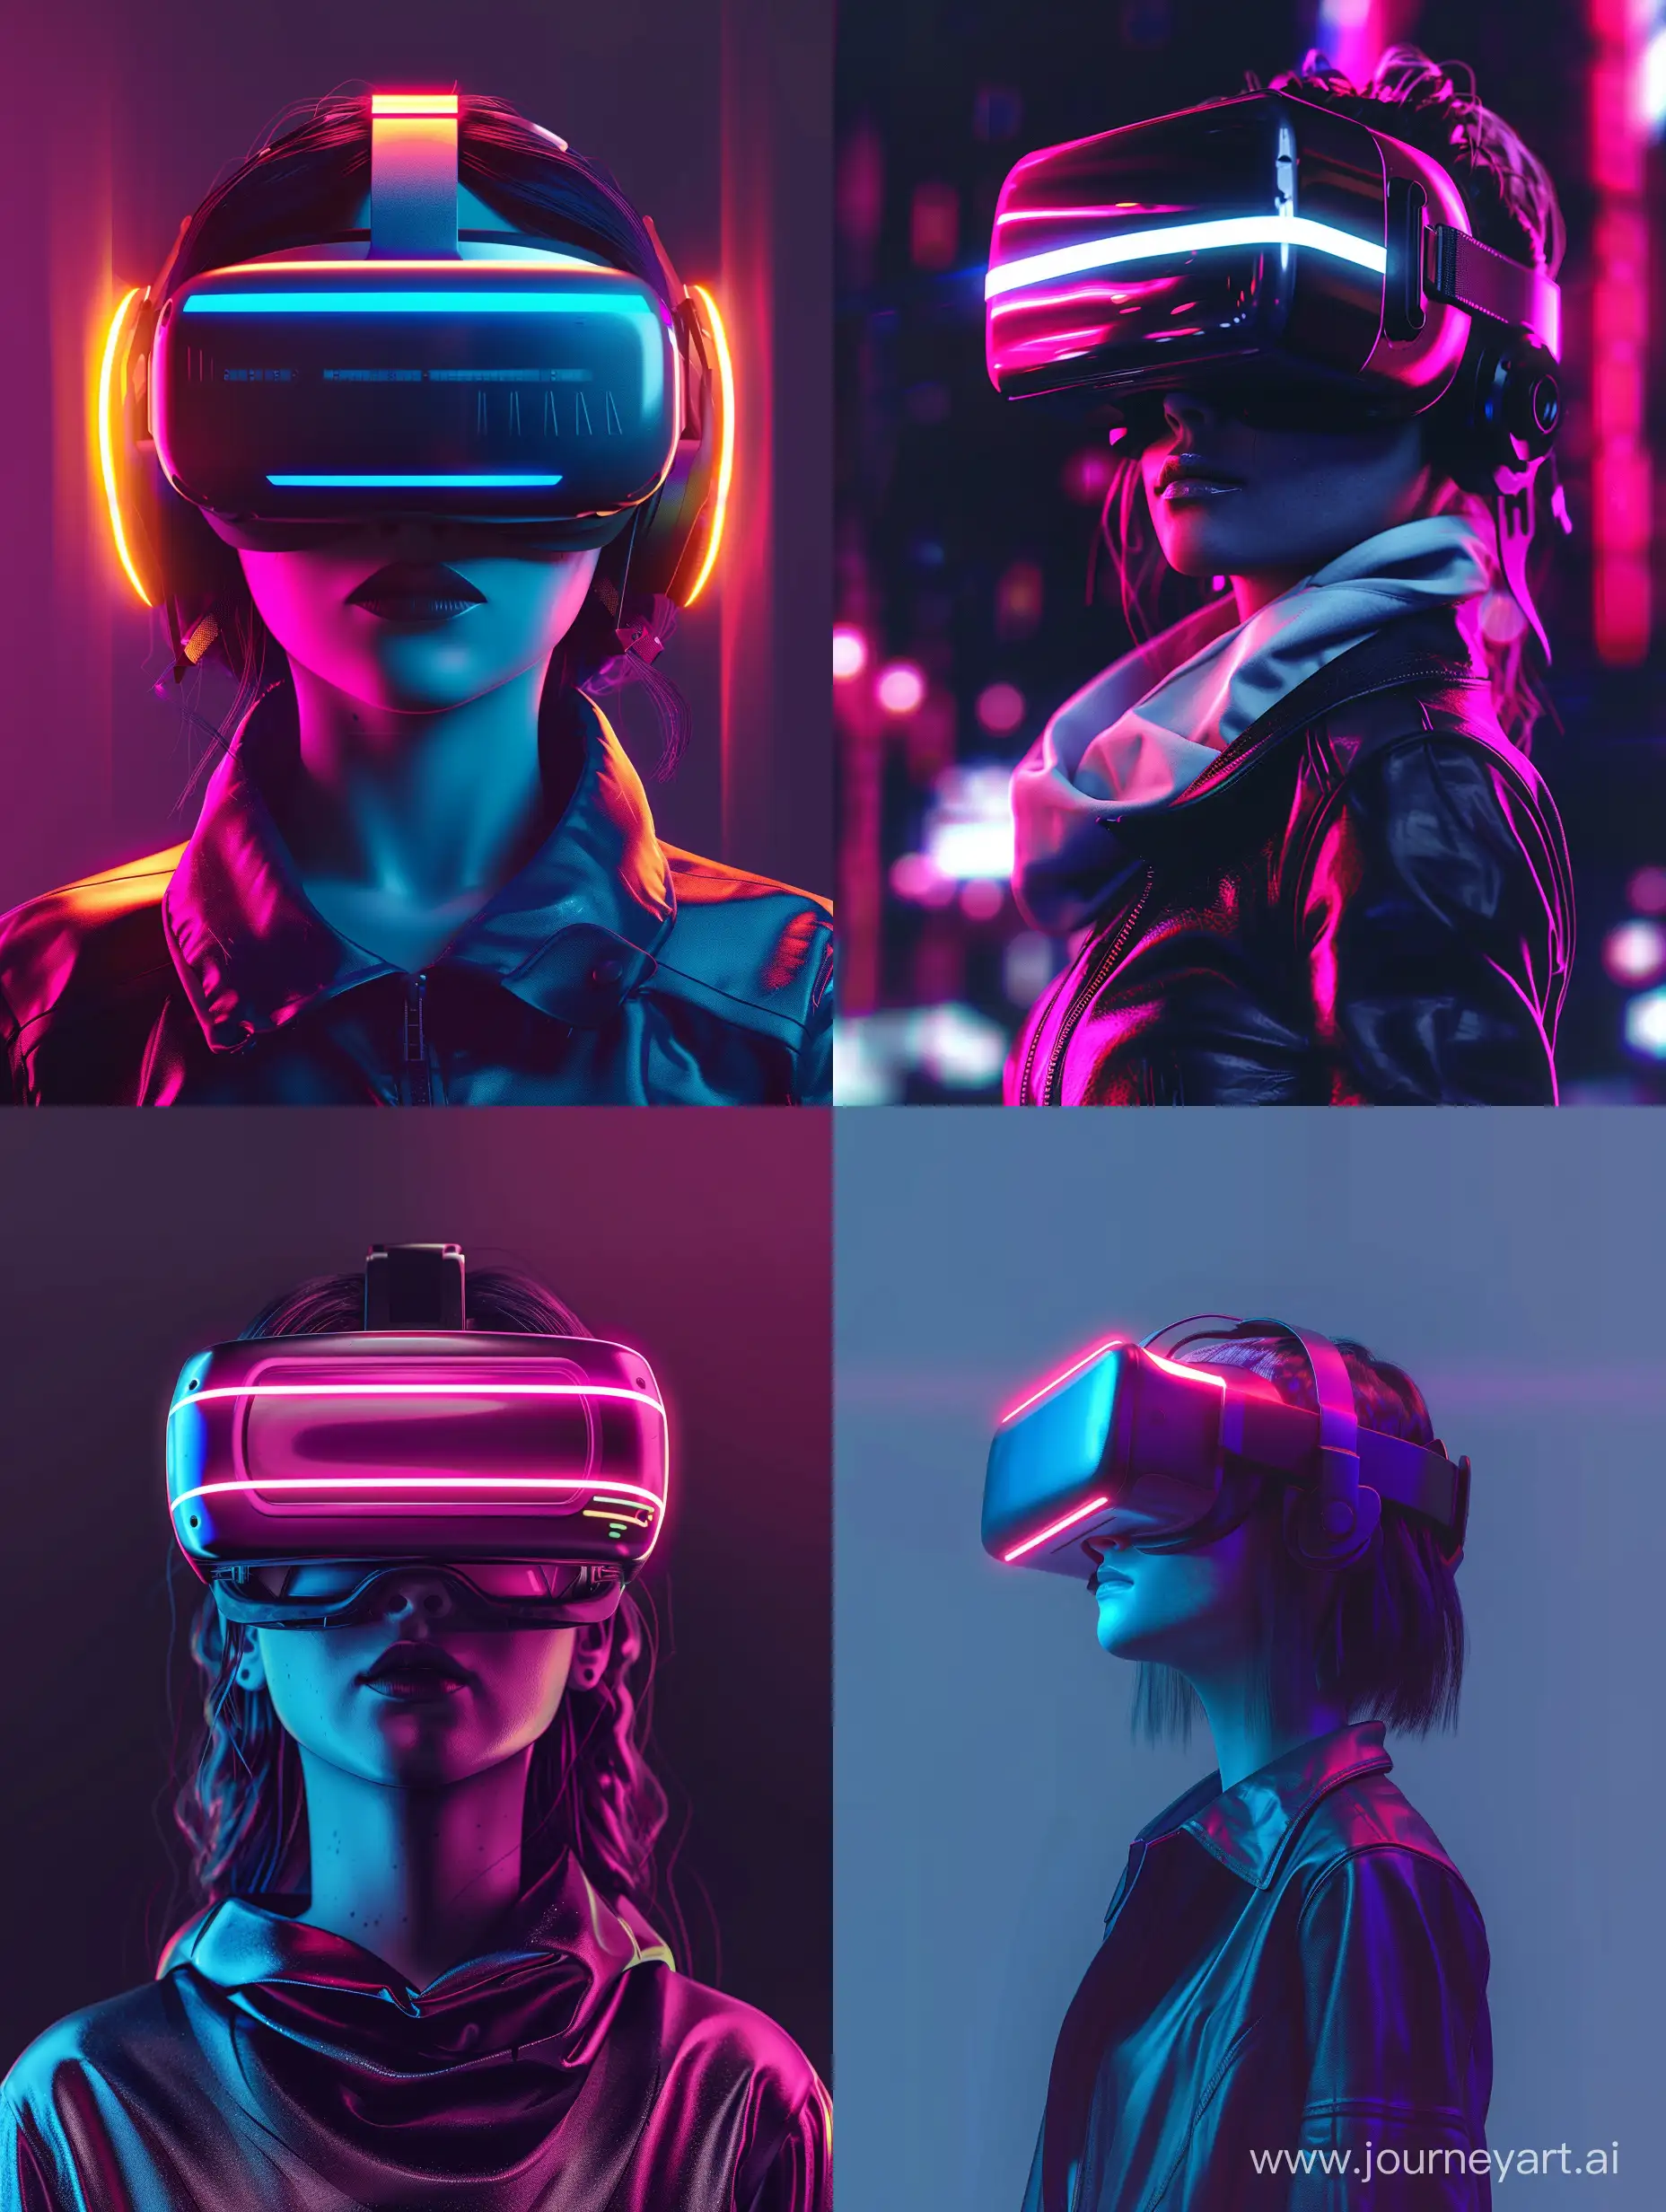 a girl animation character wearing a VR headset, cyberpunk theme, ultra-futuristic, subtle neon lighting.